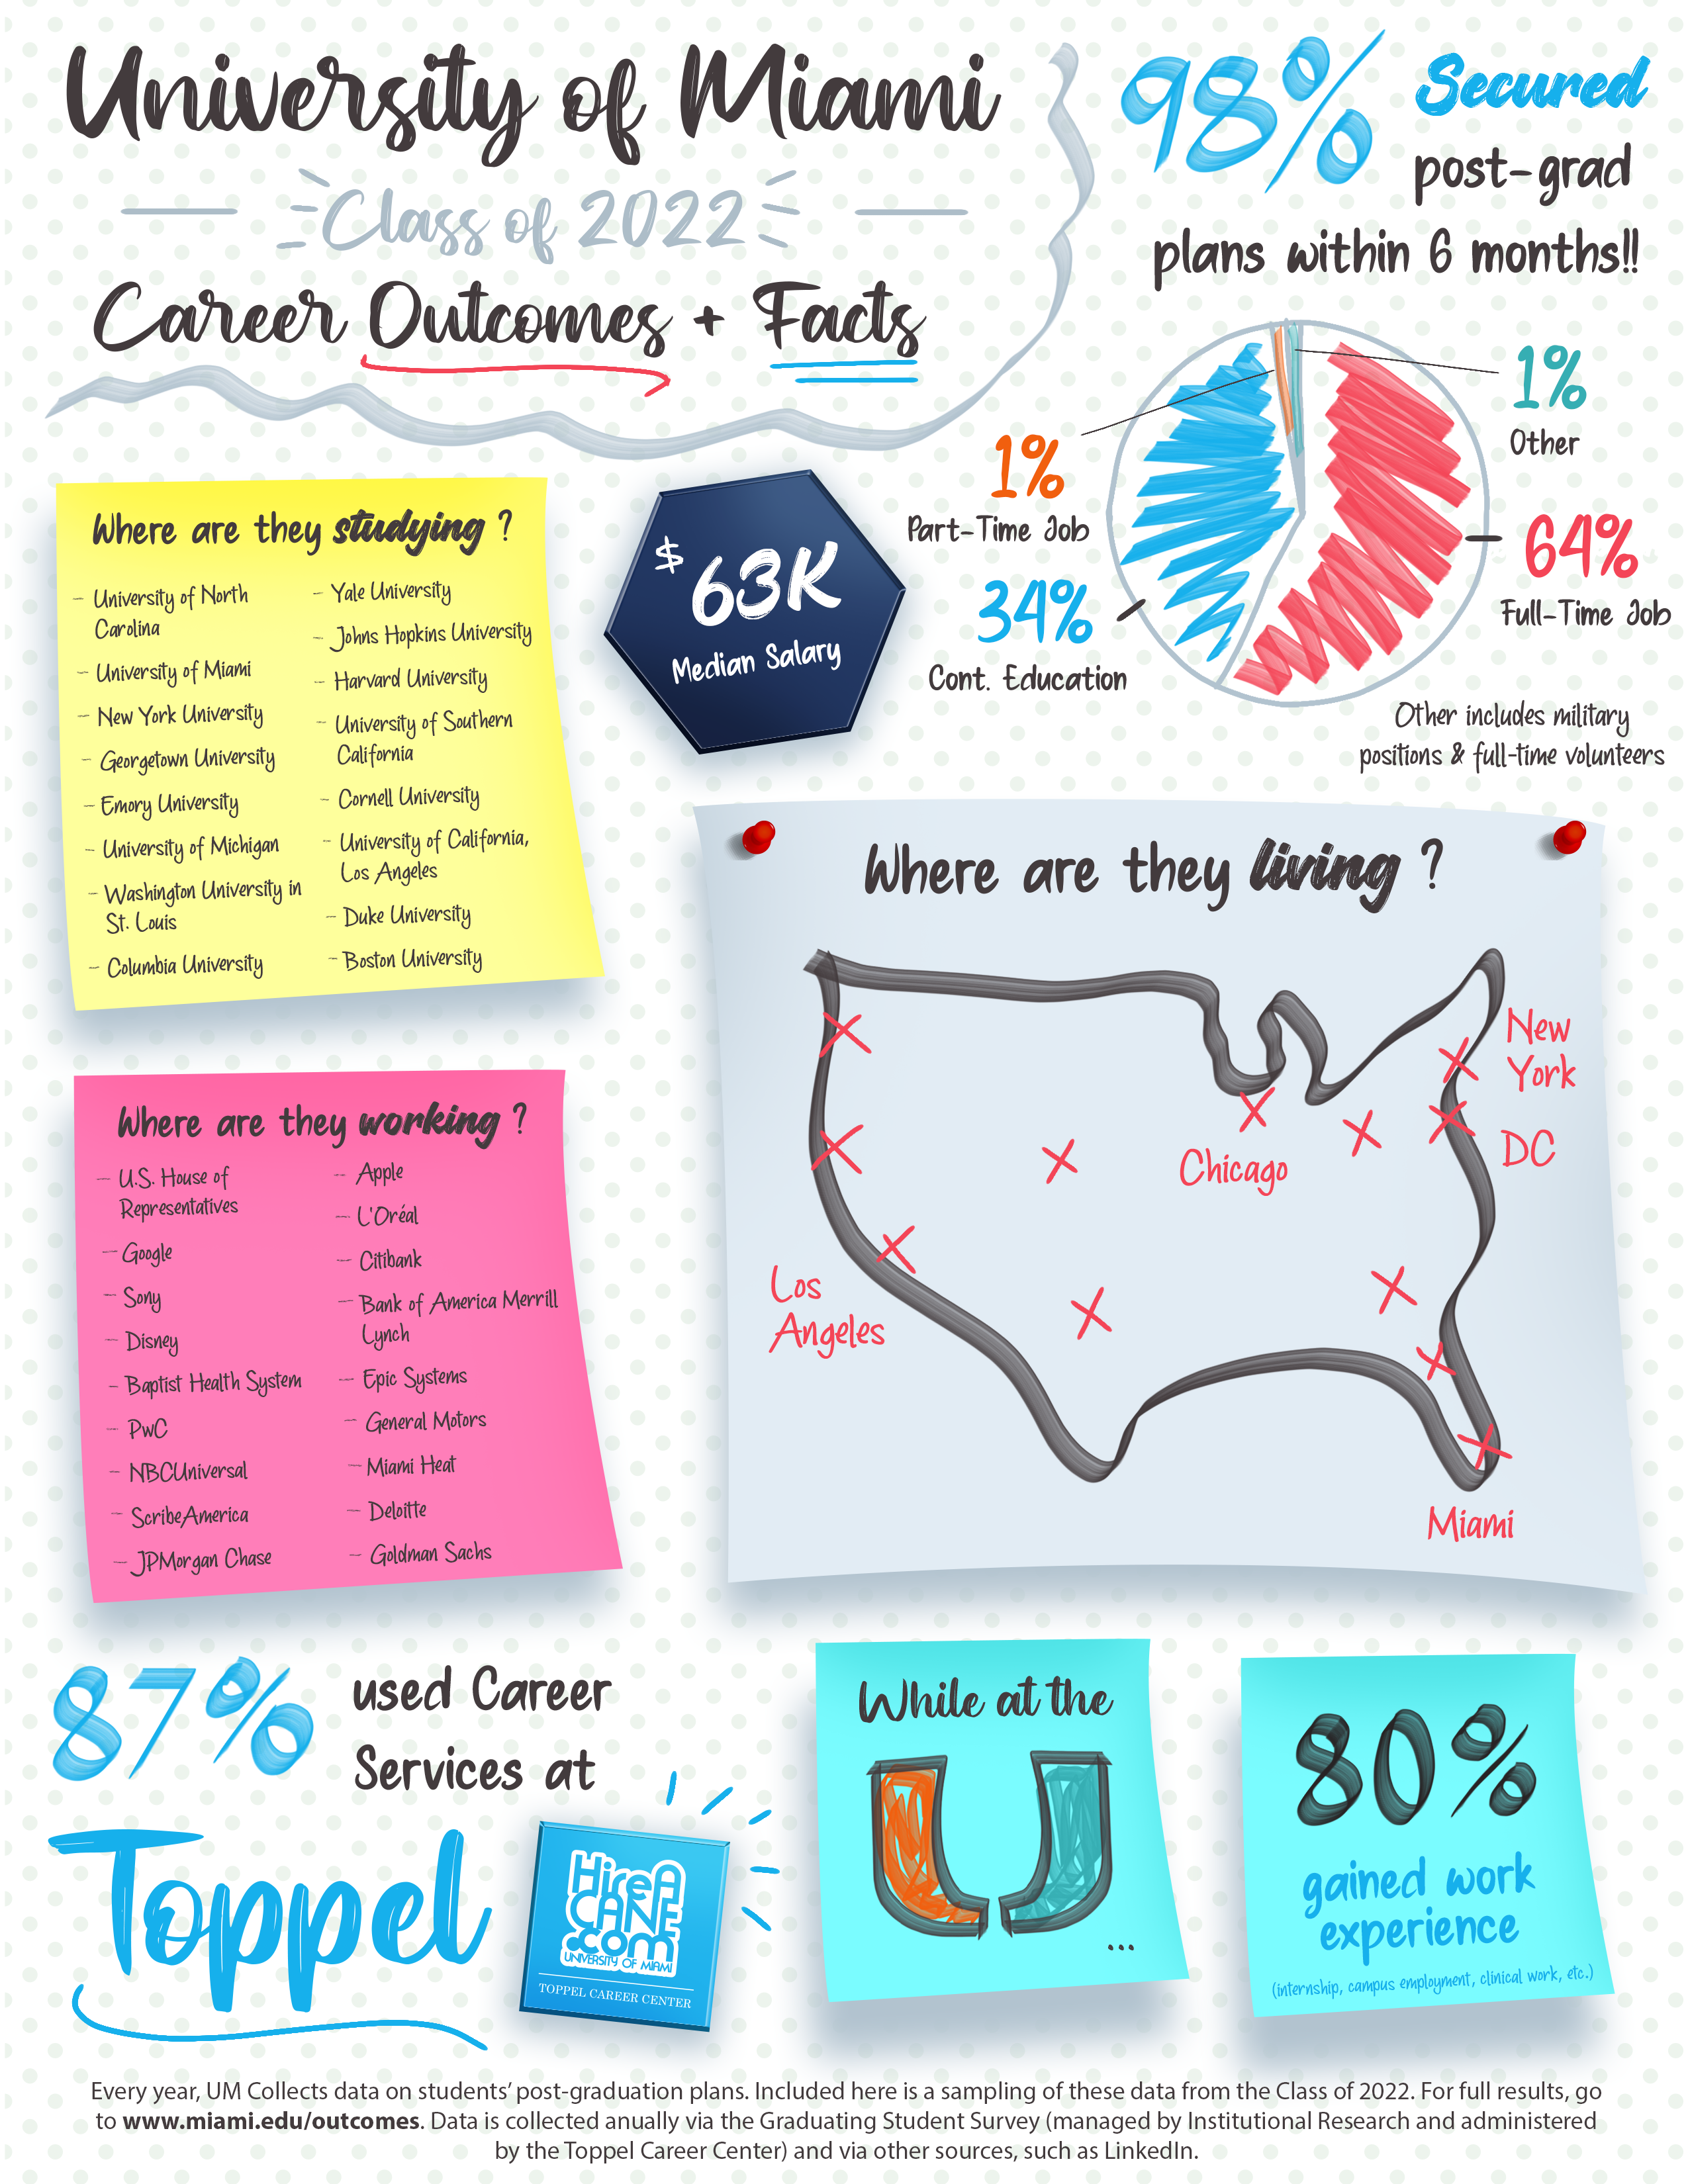 University of Miami Career Outcomes Infographic